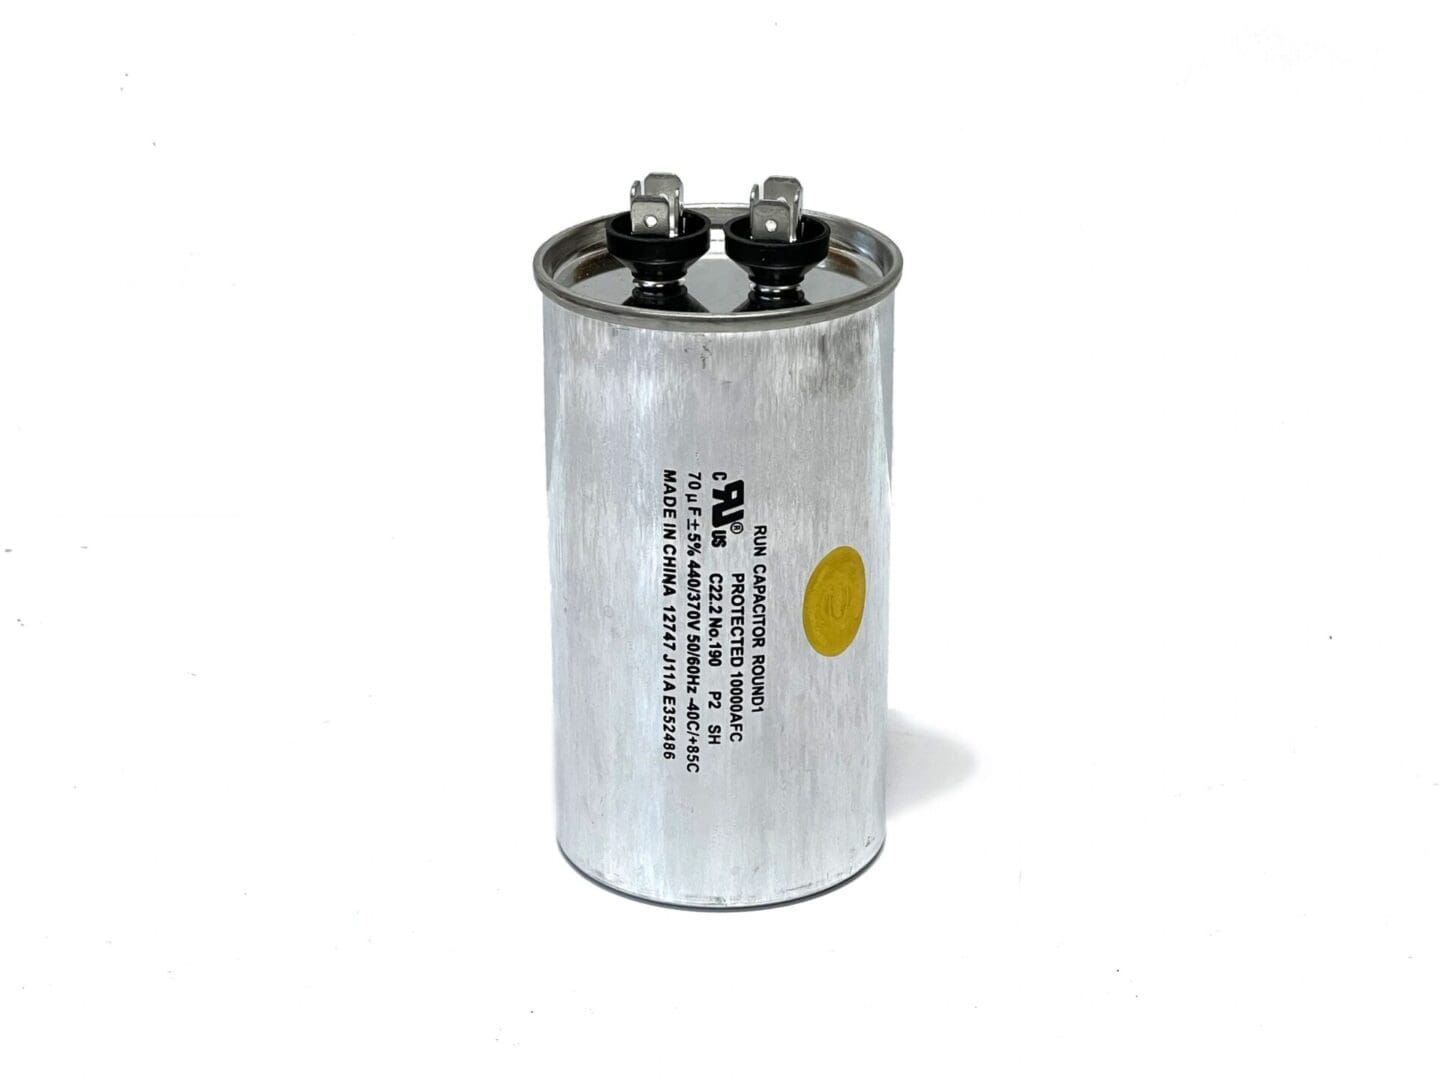 A close up of a capacitor on a white background